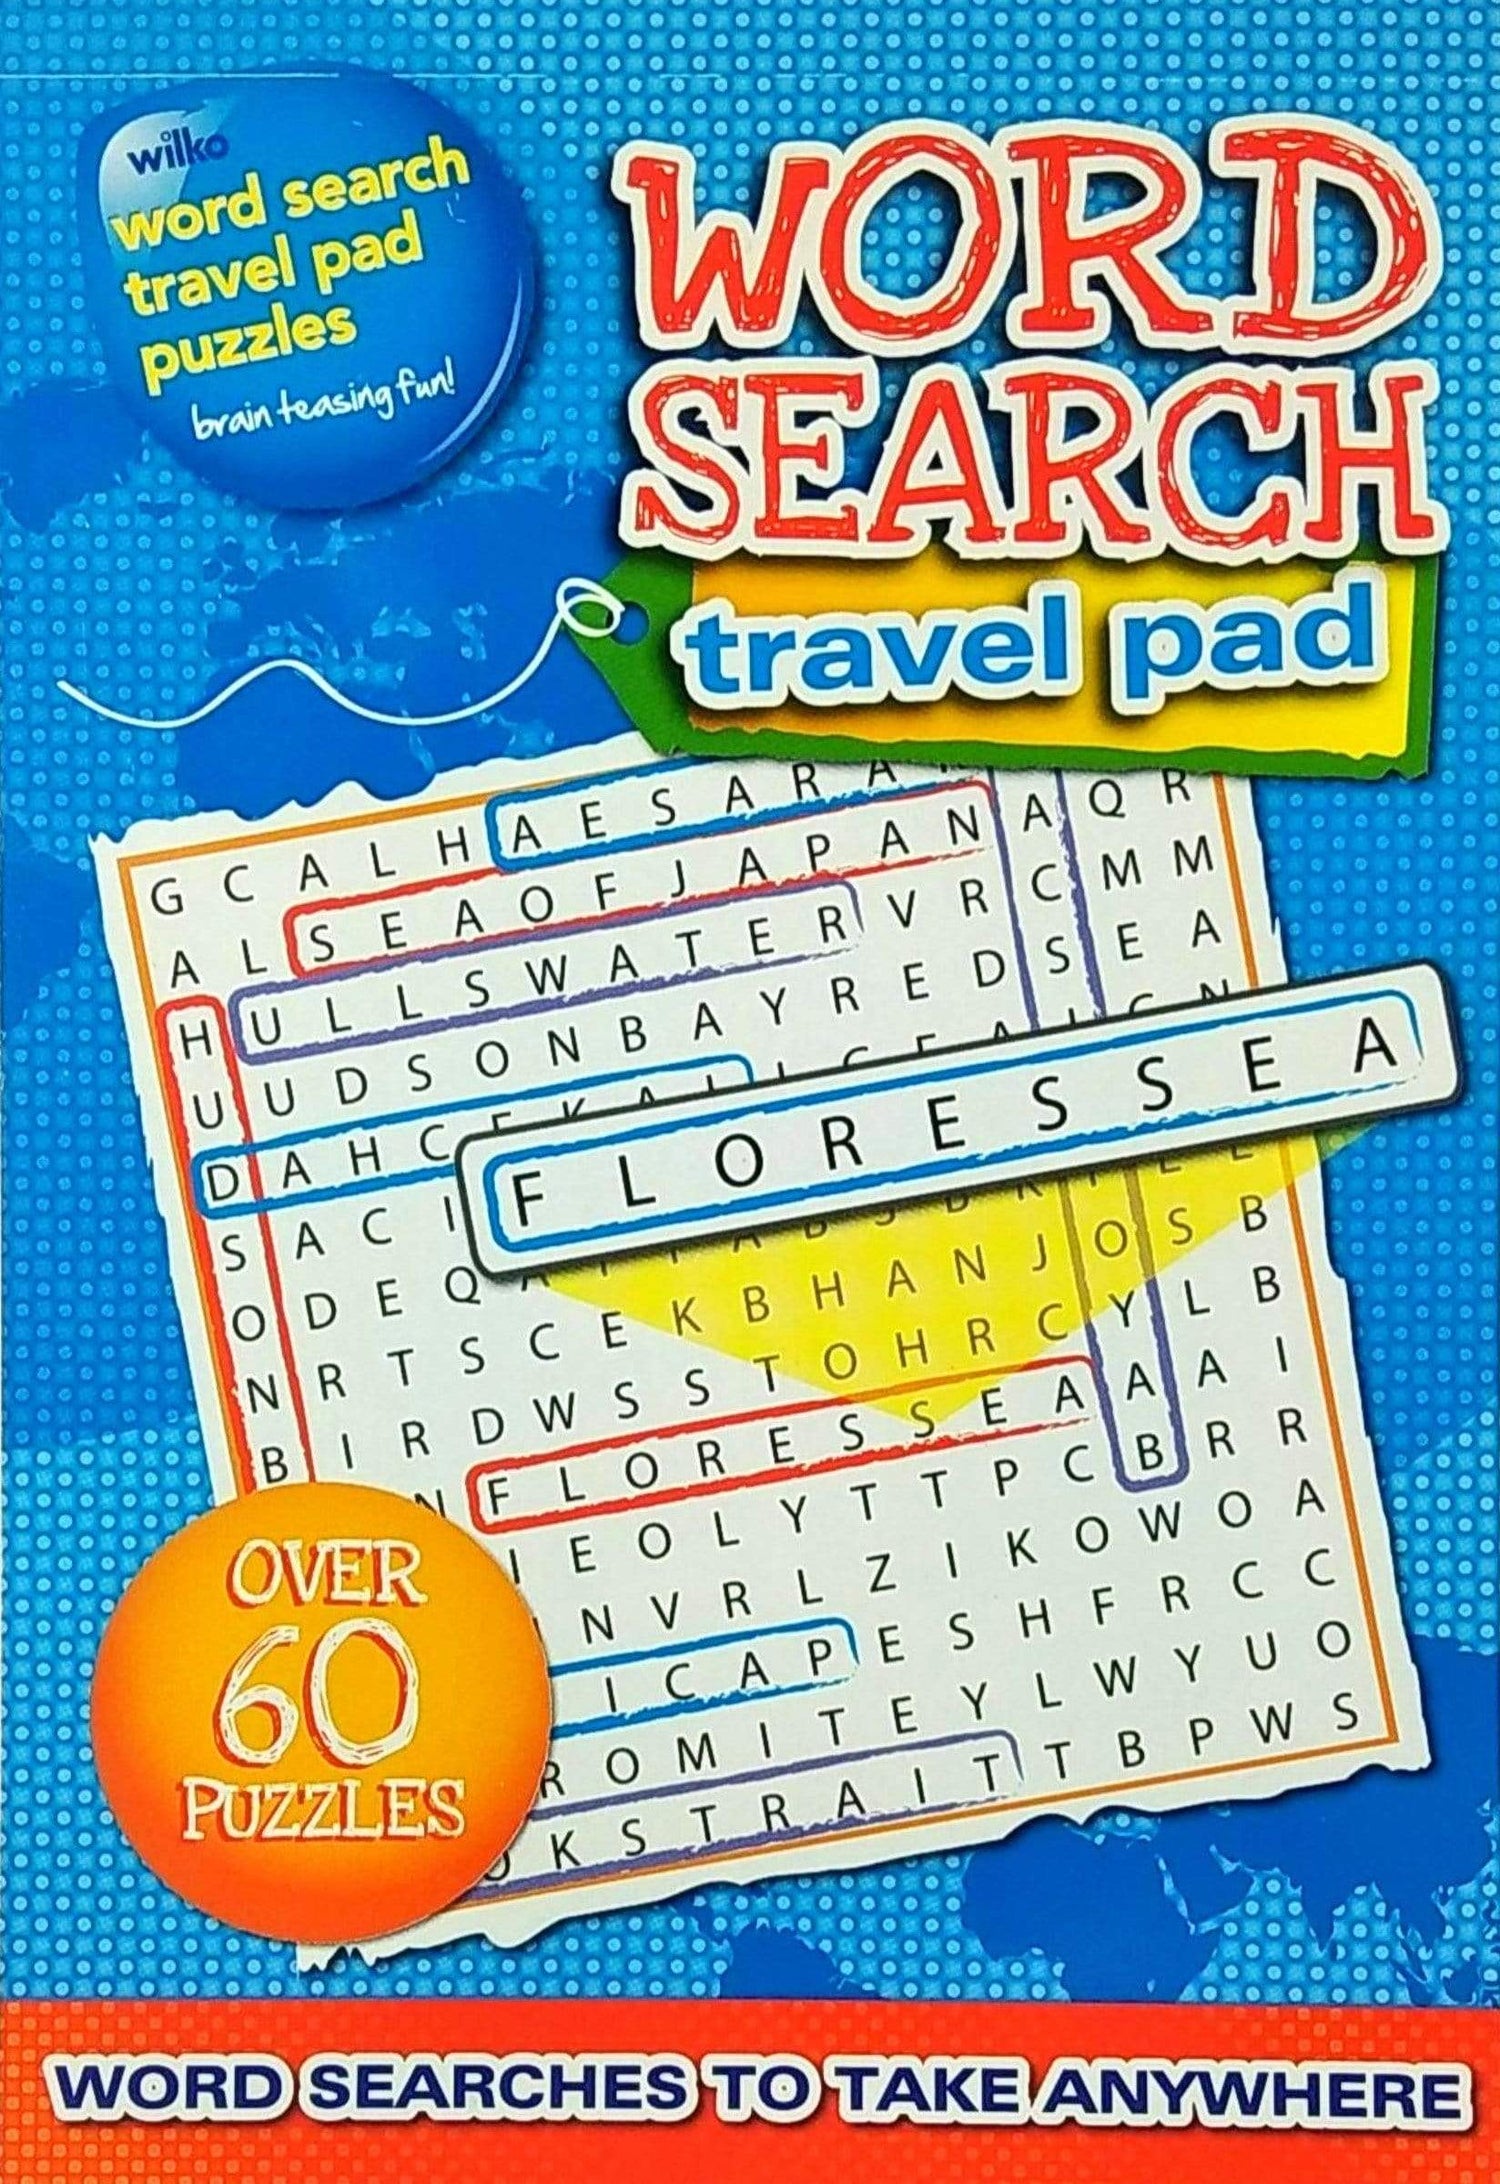 Word Search: Travel Pad